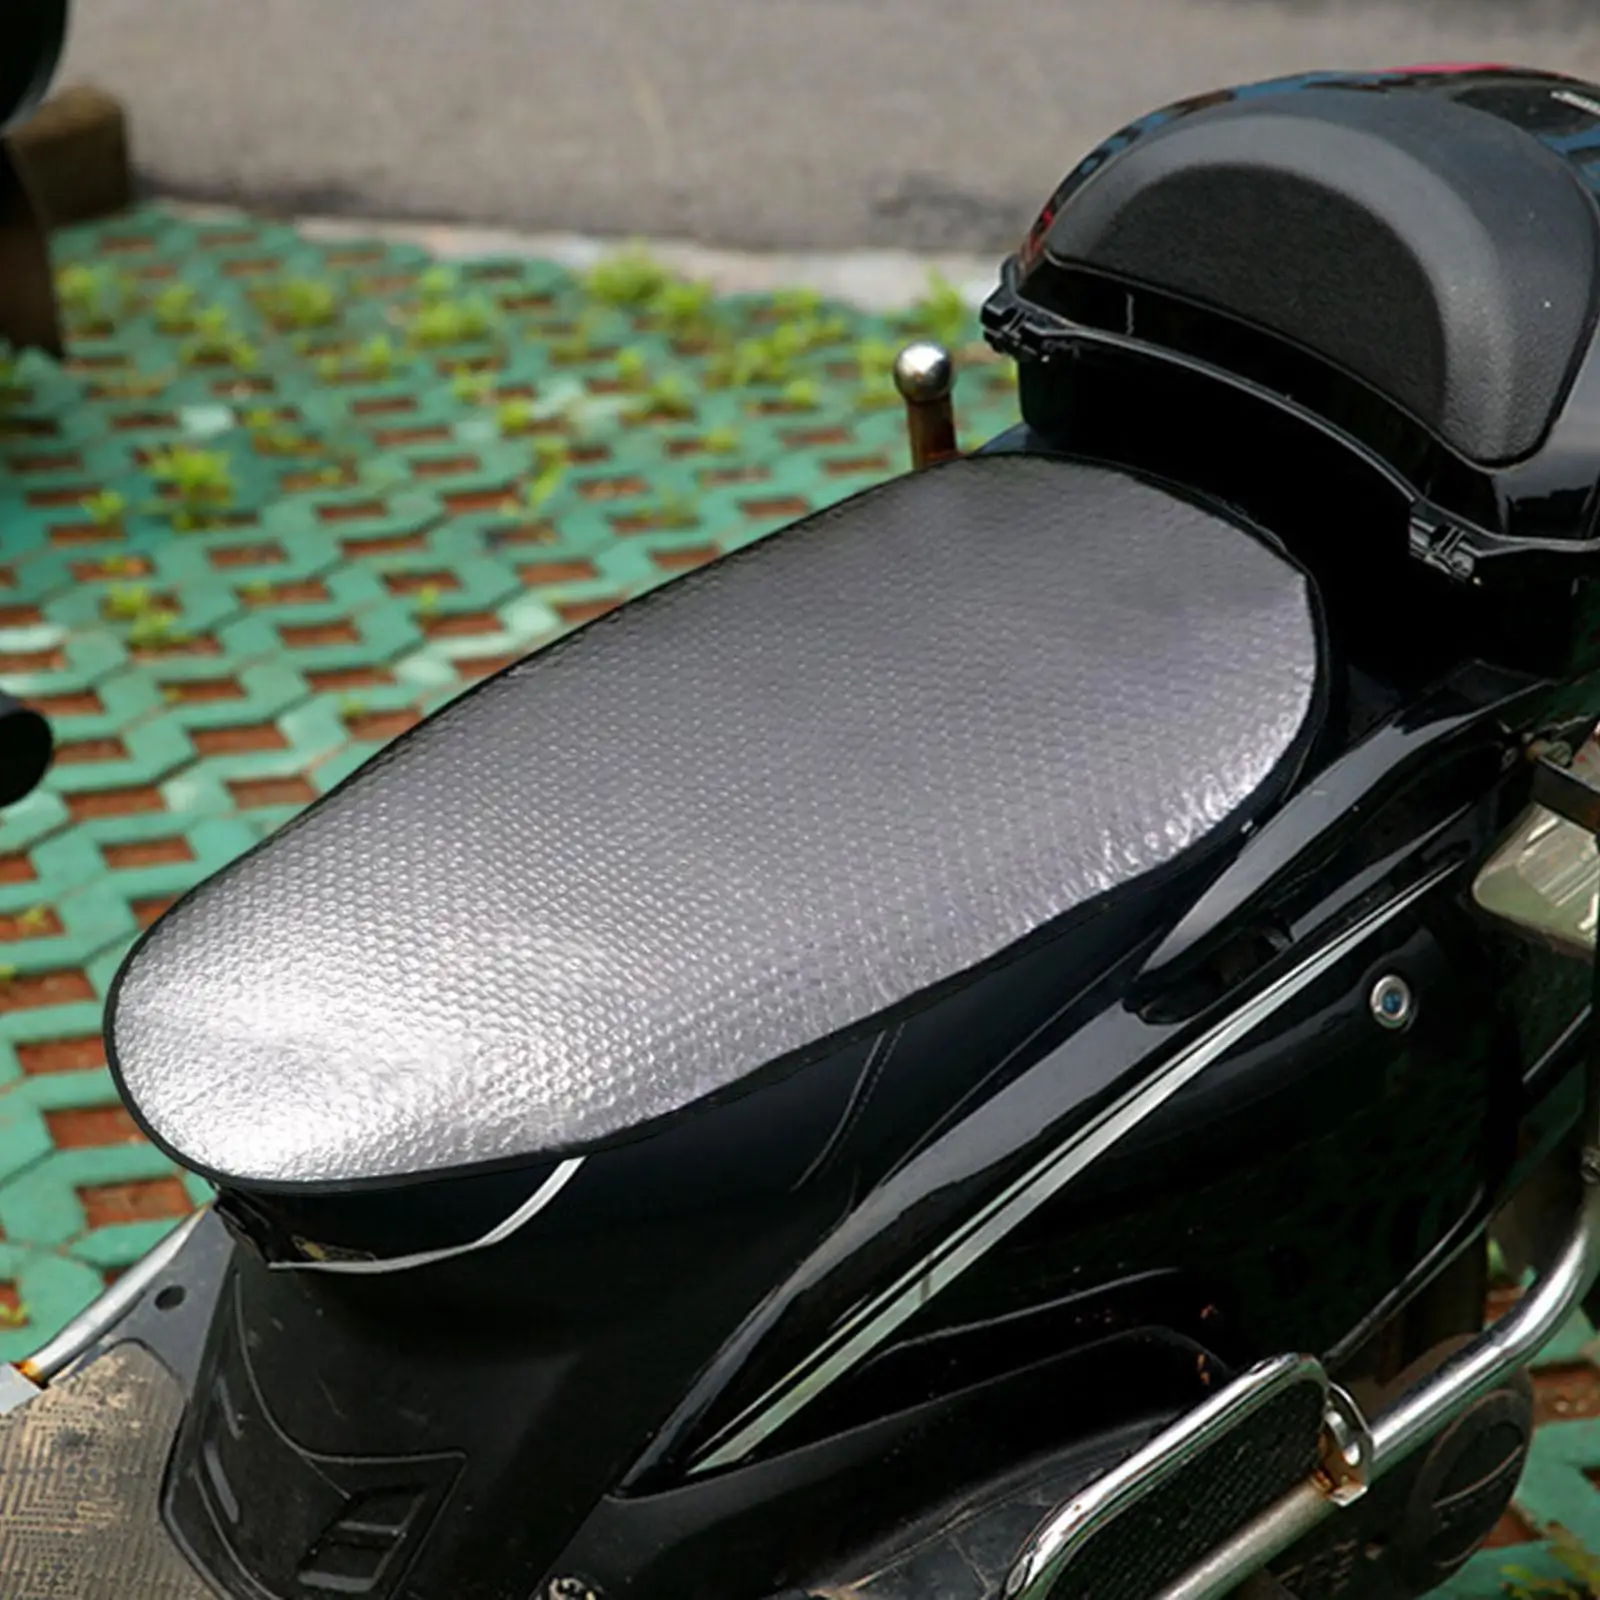 Motorcycle Seat Cover Seat Protector Cover Motorbike Seat Pad Cover Portable Anti Slip Waterproof PU Leather for Motorcycle